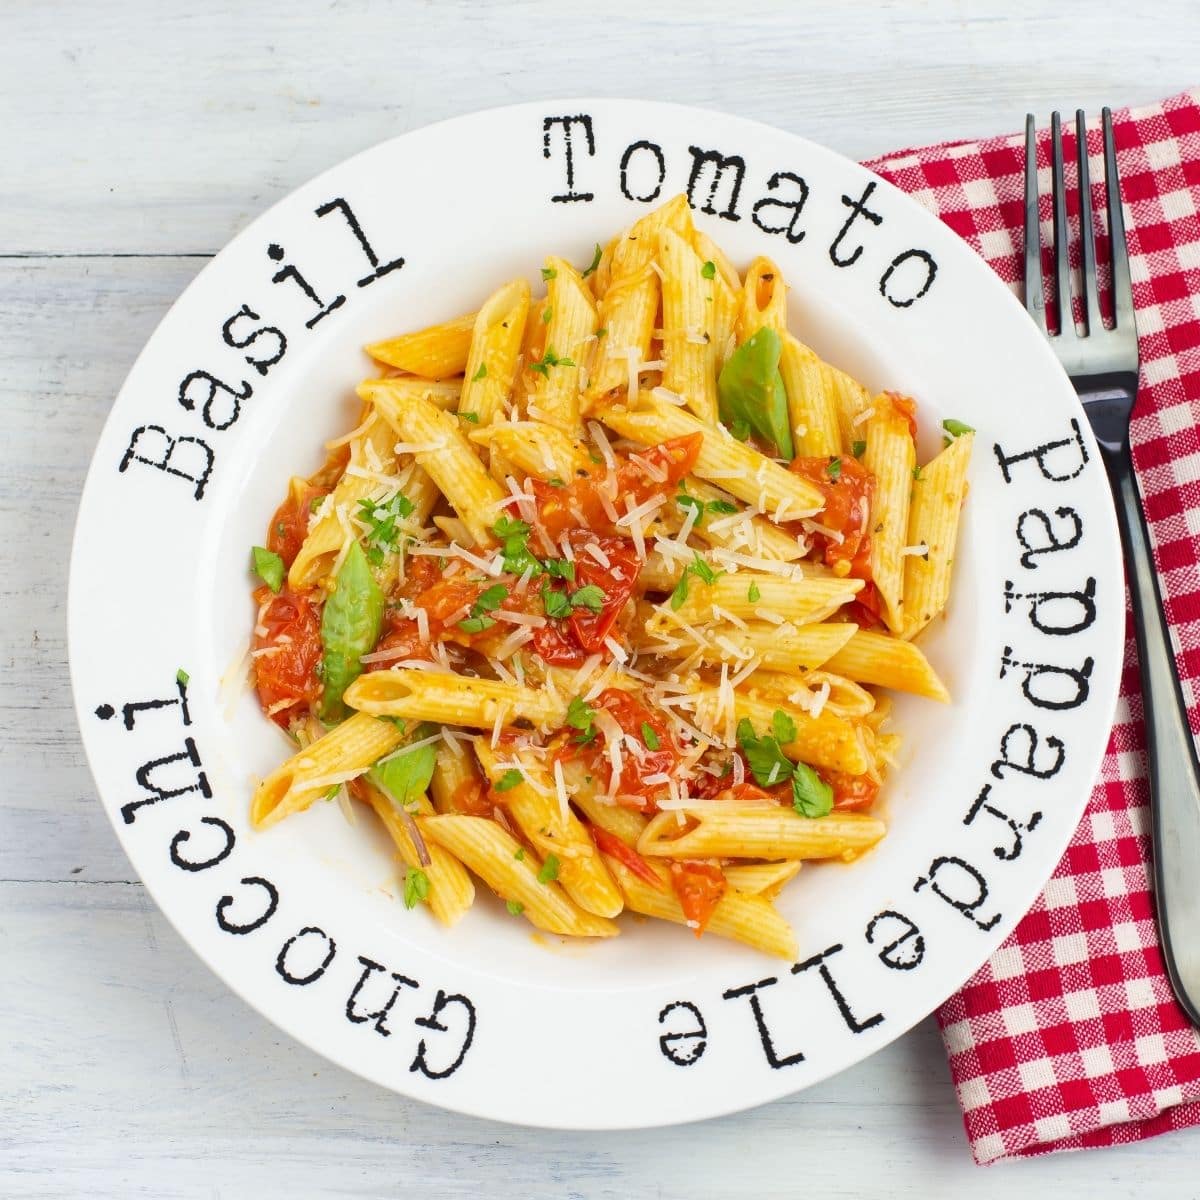 Pasta bowl filled with noodles tossed with cherry tomato sauce.